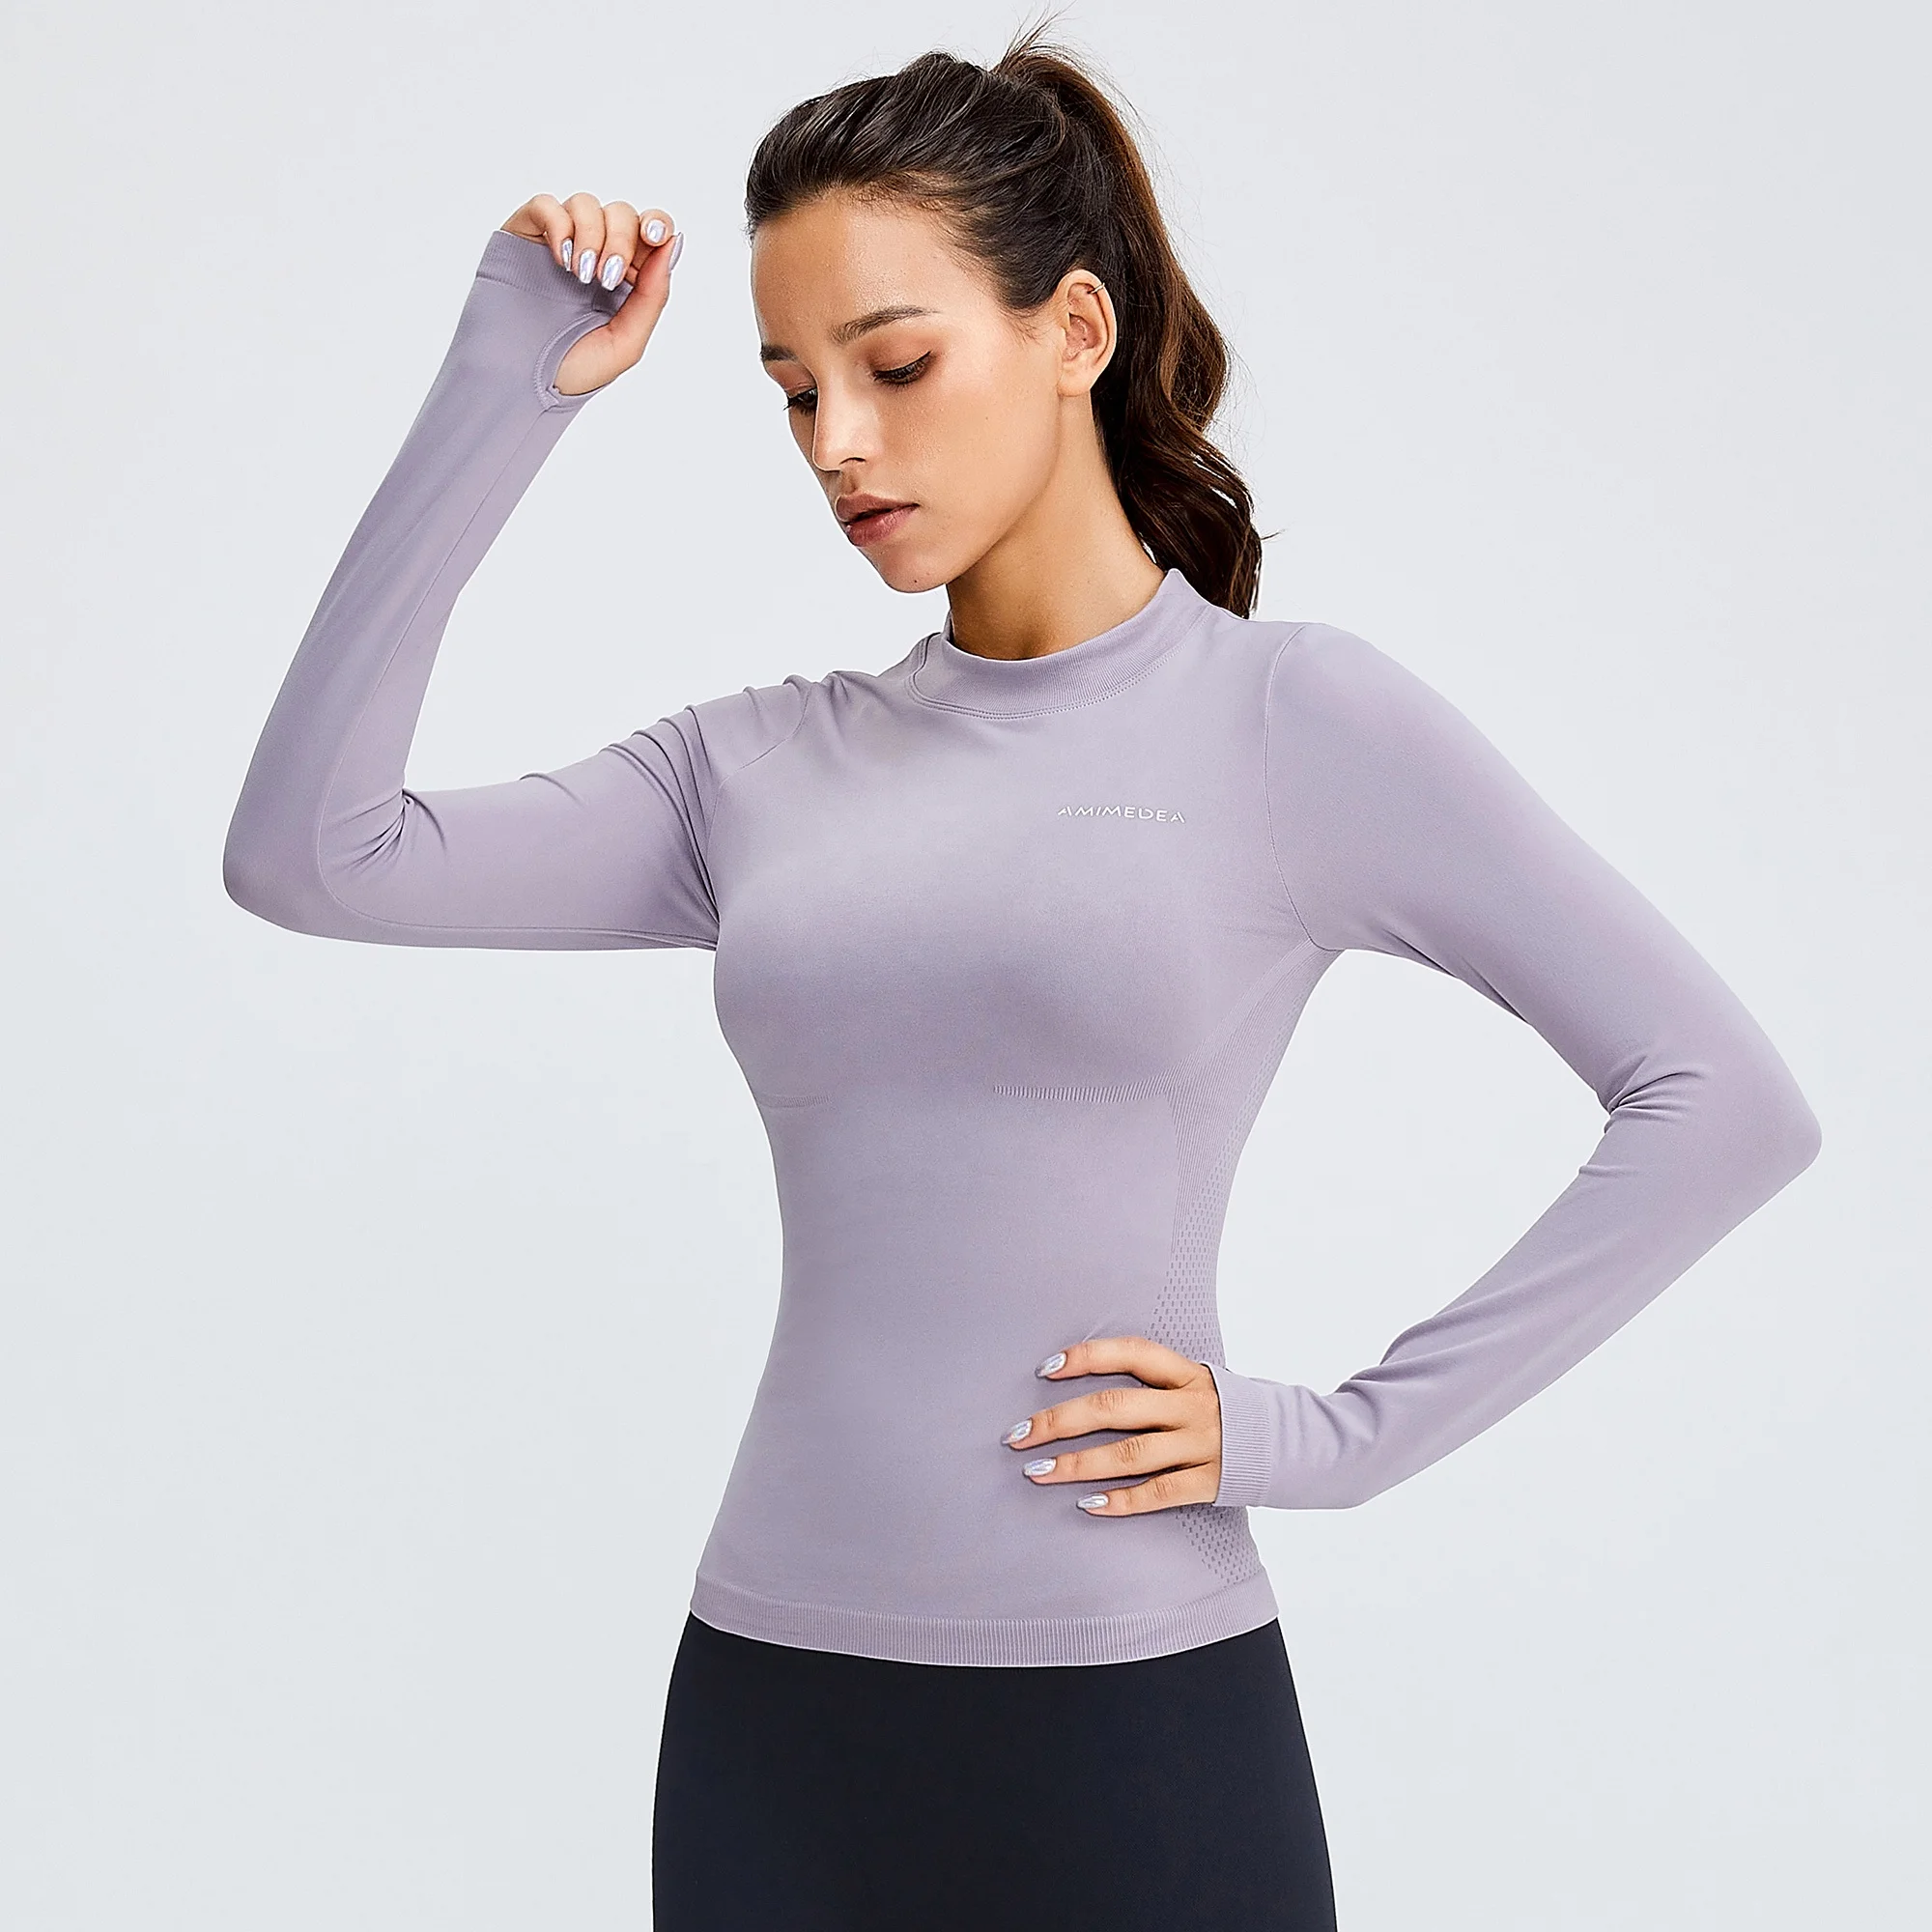 Girls Athletic Compression Shirt Running Gym Base Layer Dri fit Long Sleeve Top